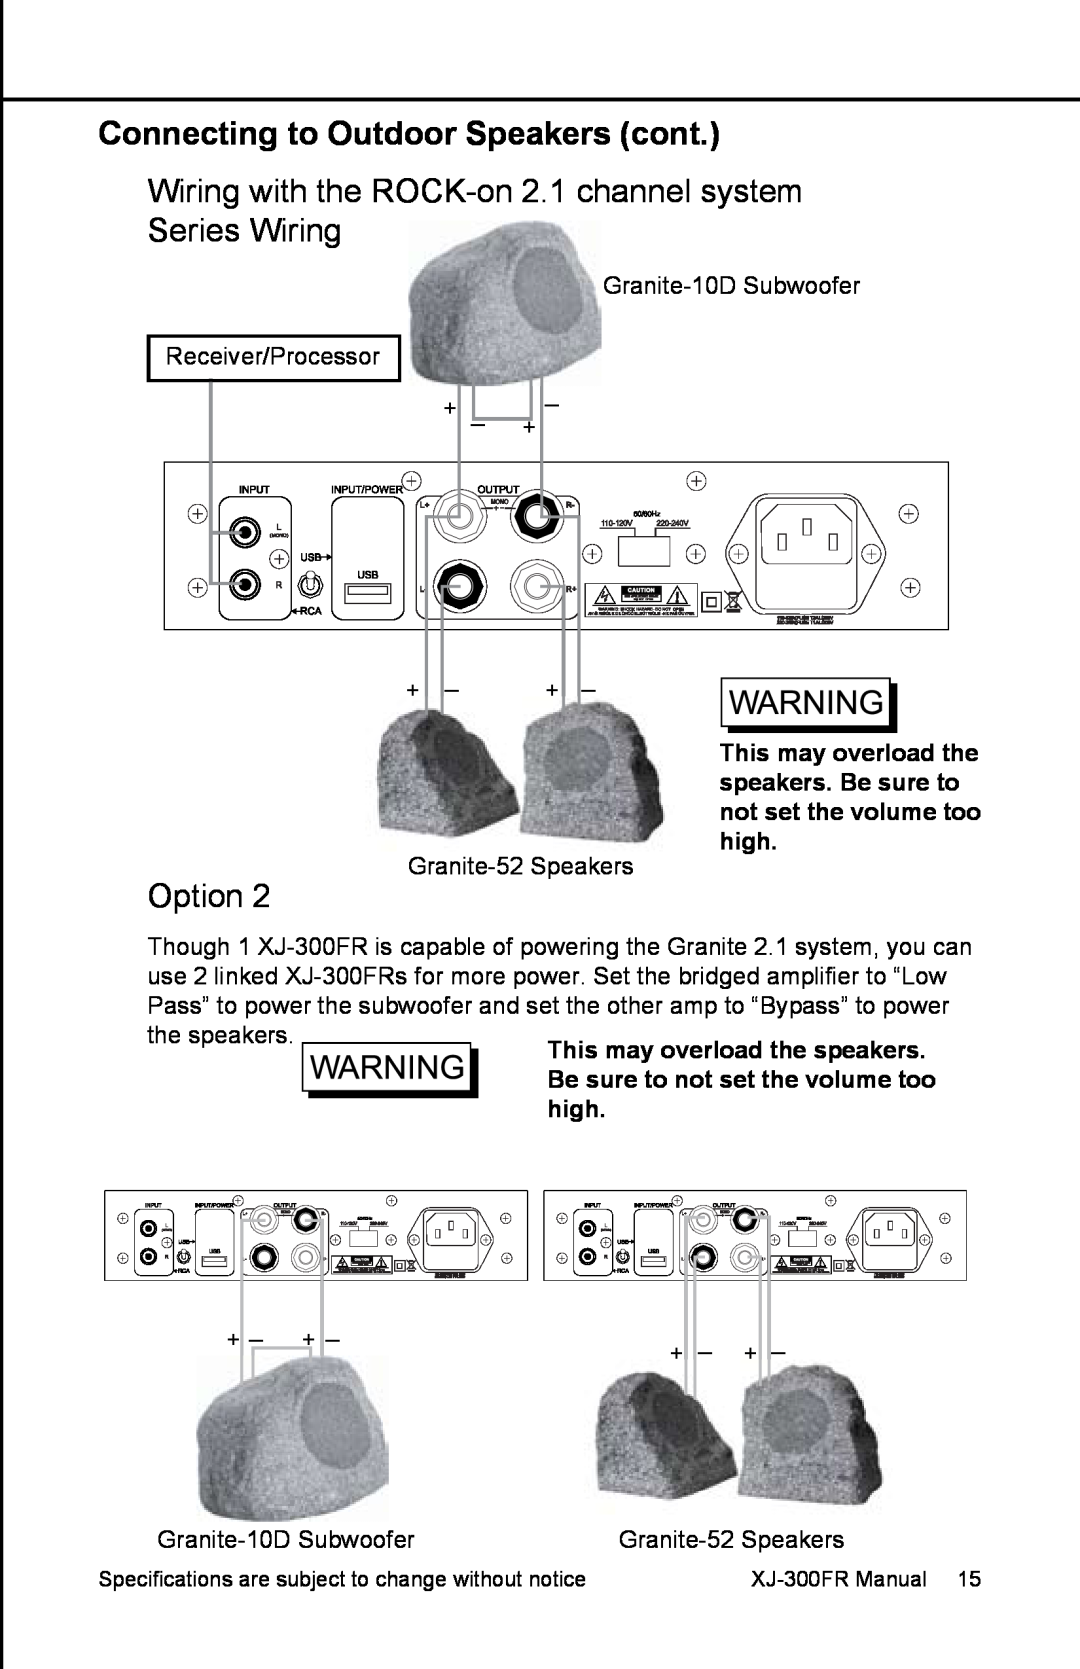 Earthquake Sound XJ-300 FR user manual Connecting to Outdoor Speakers cont, Option 